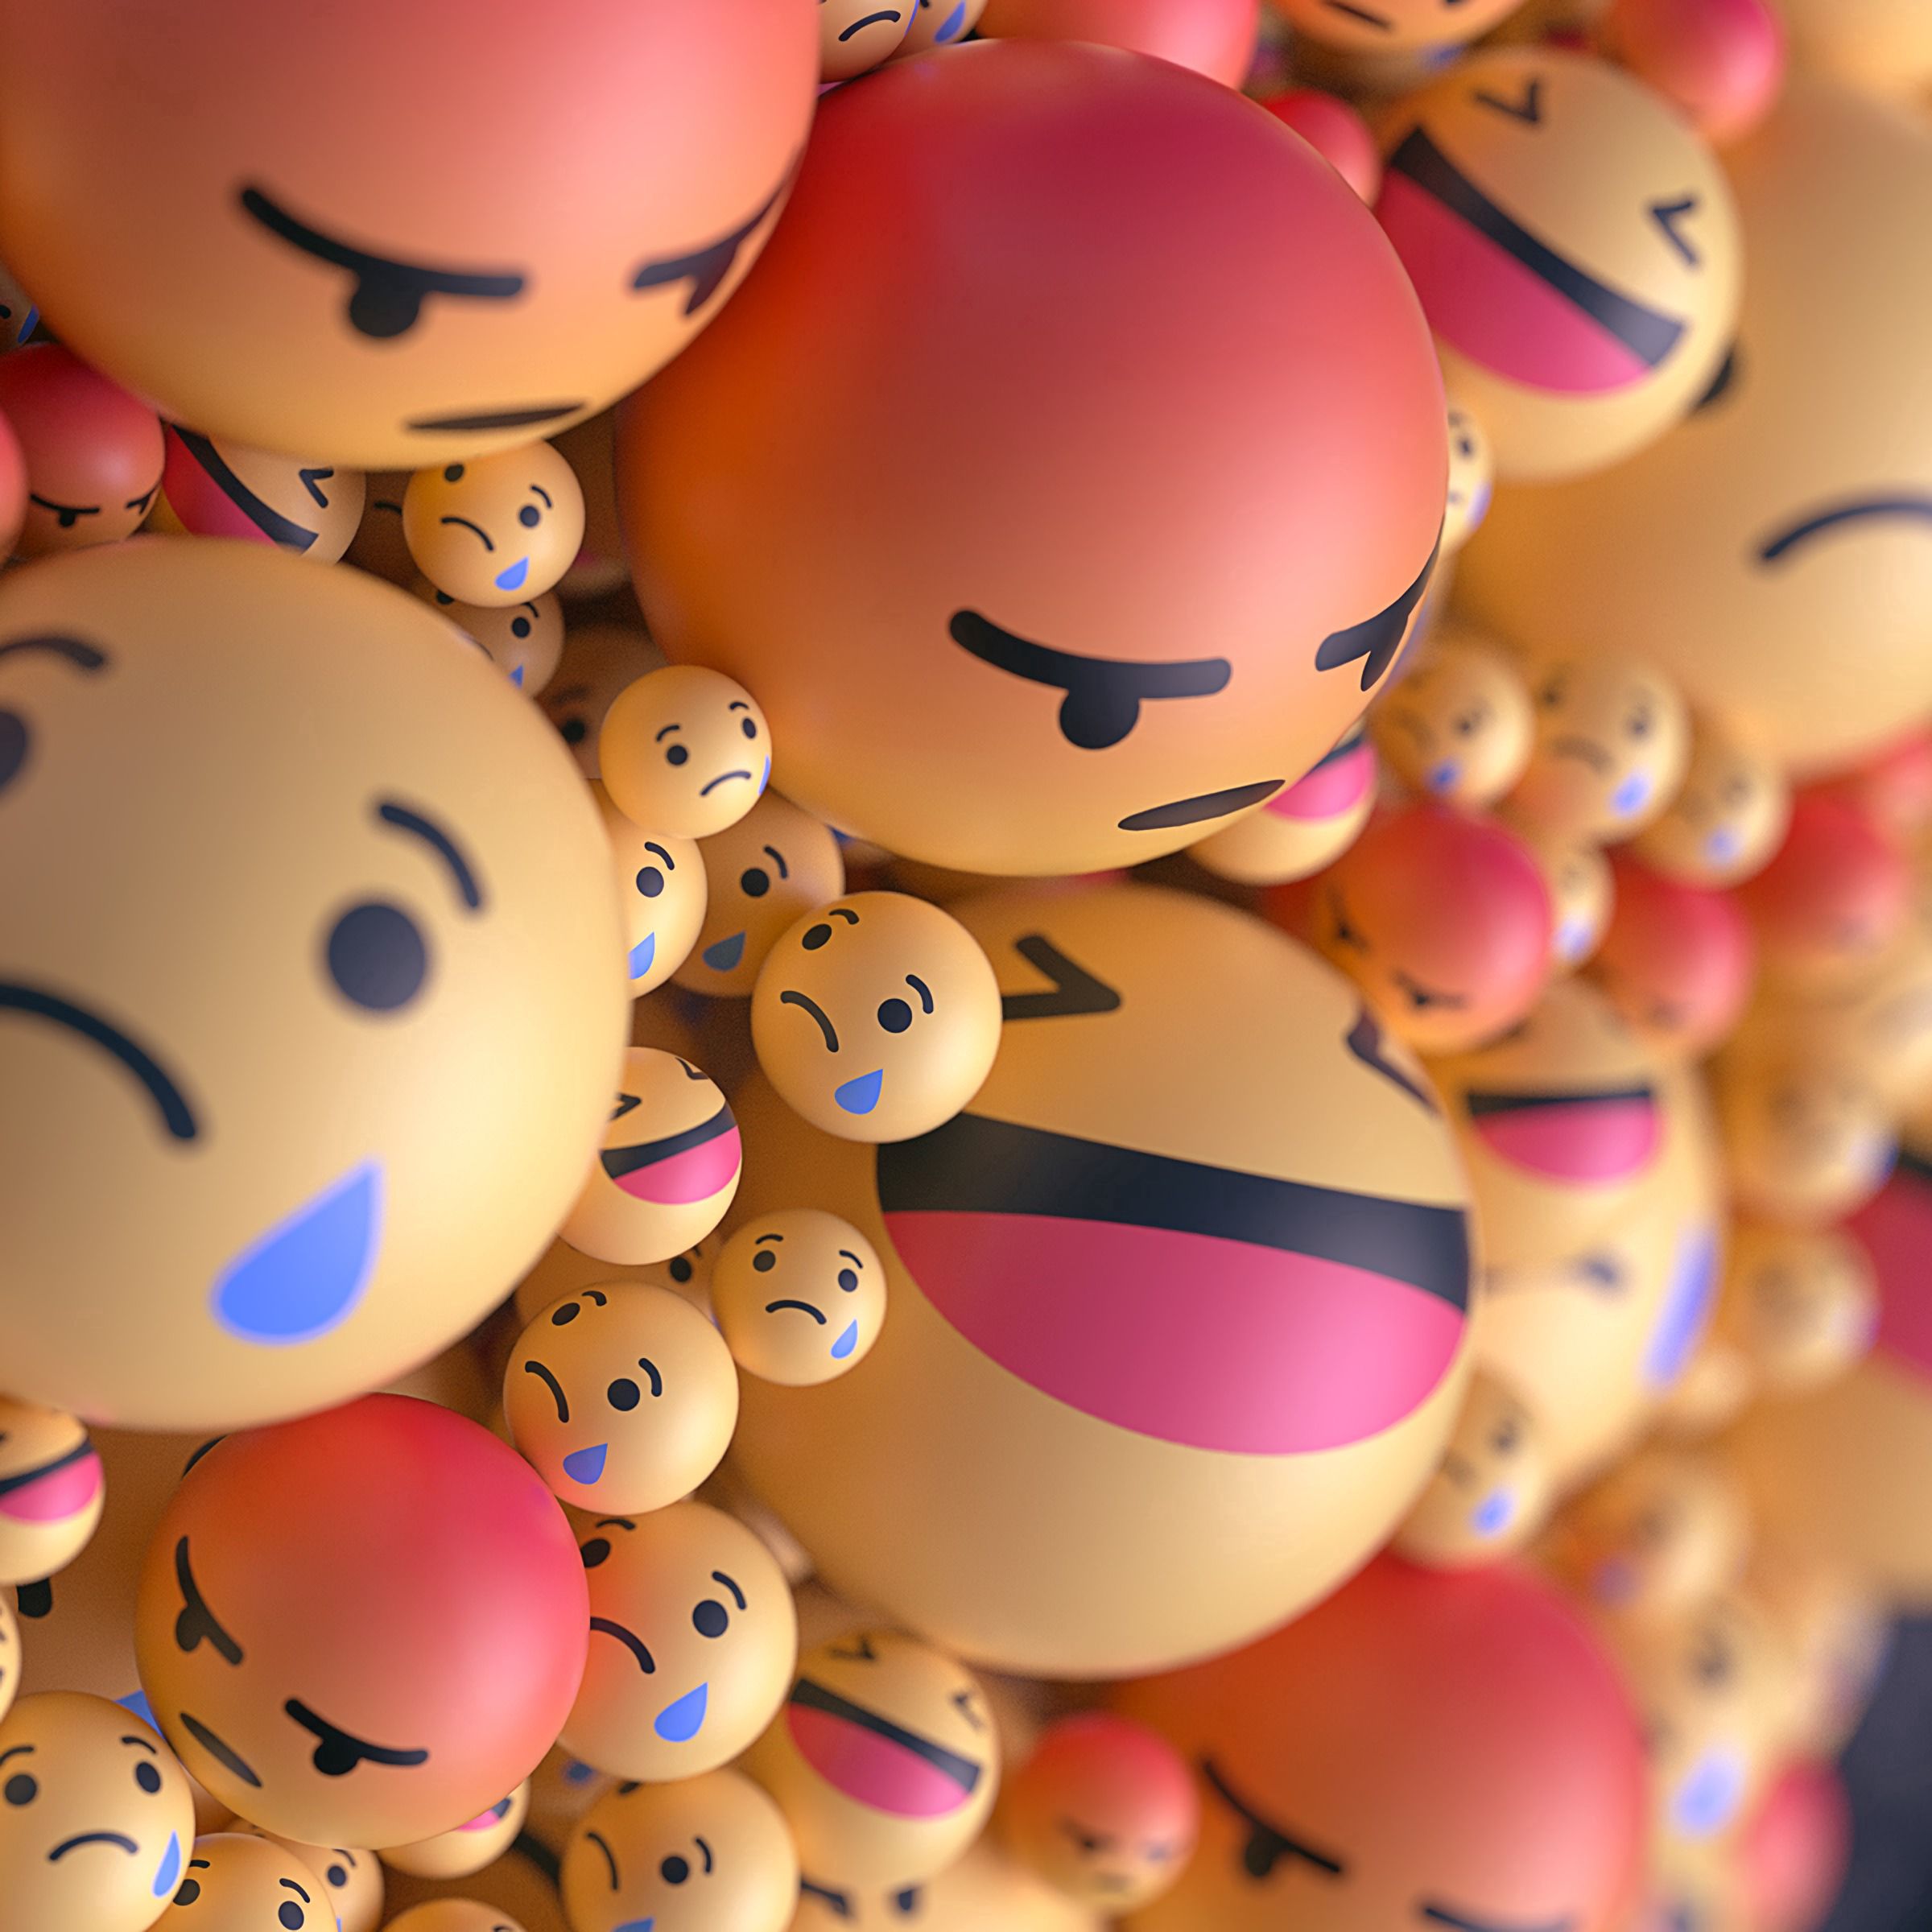 3d, emoticons, smiles, balloons, taw, smilies, smileys, emotions Smartphone Background